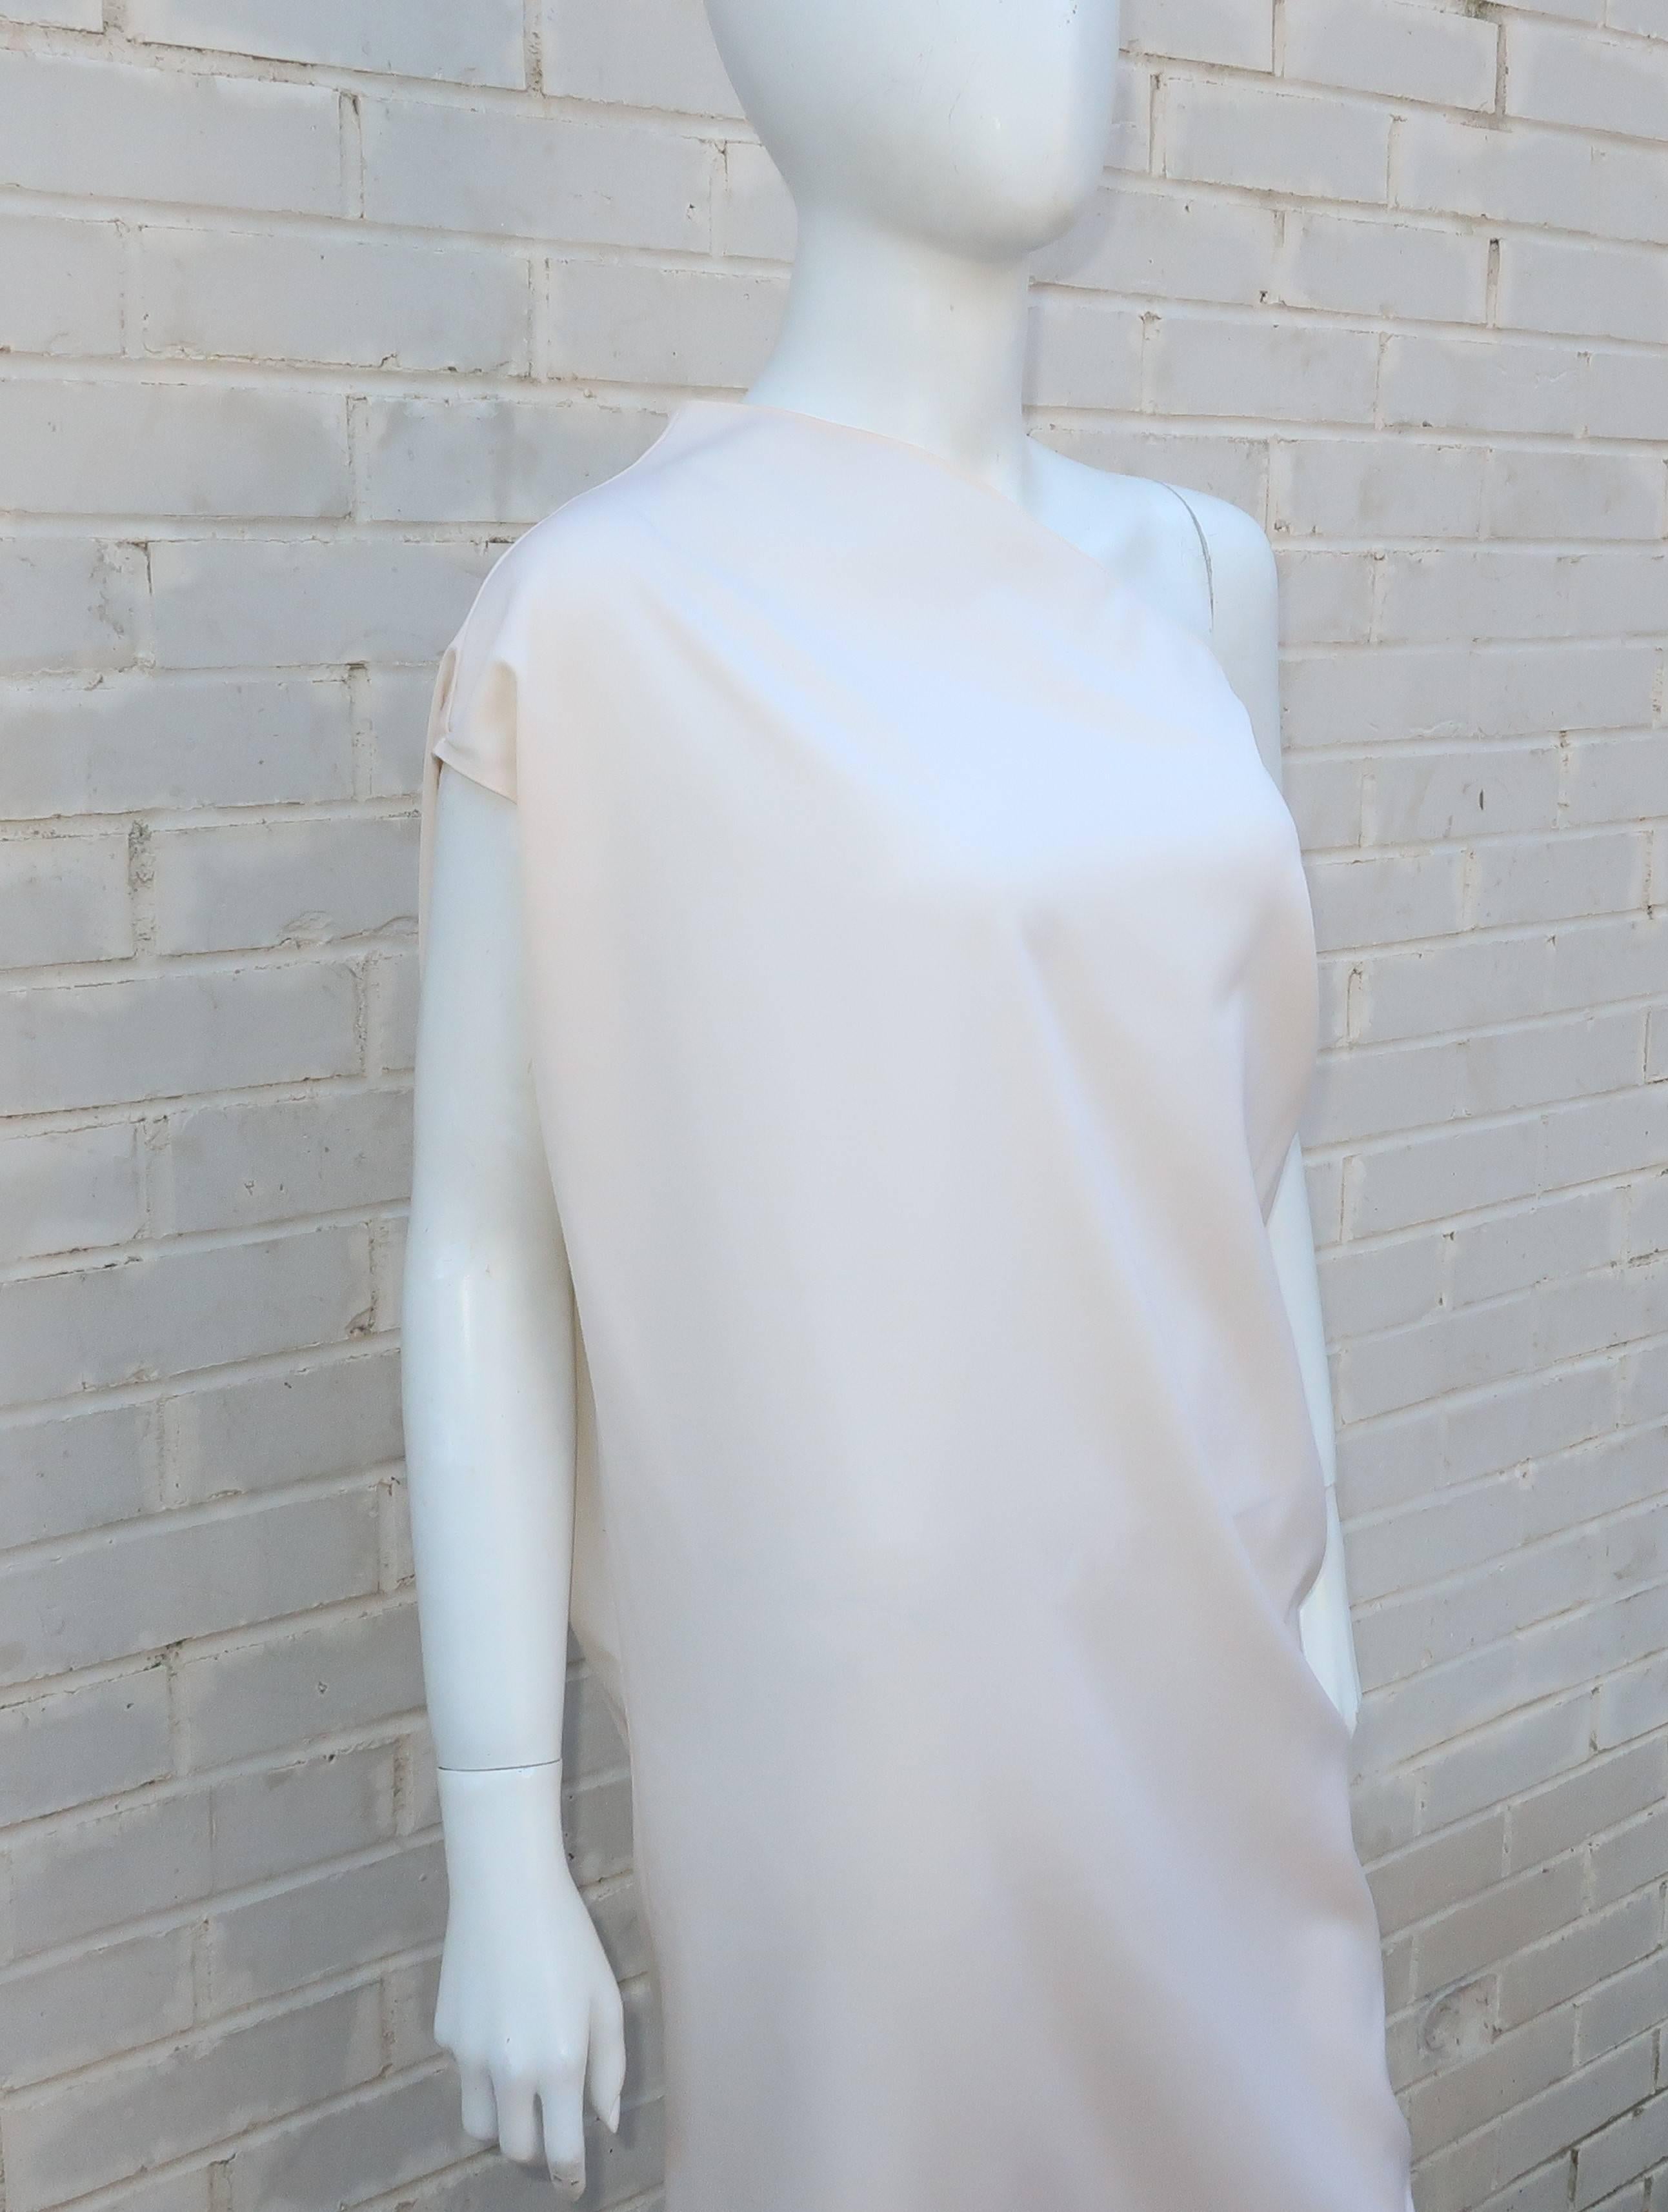 Combine contemporary Italian design and a classic goddess silhouette for this simple yet stunning Krizia winter white wool dress.  Somewhat akin to a shift, the dress is a pullover construction without much structure except the feminine shape